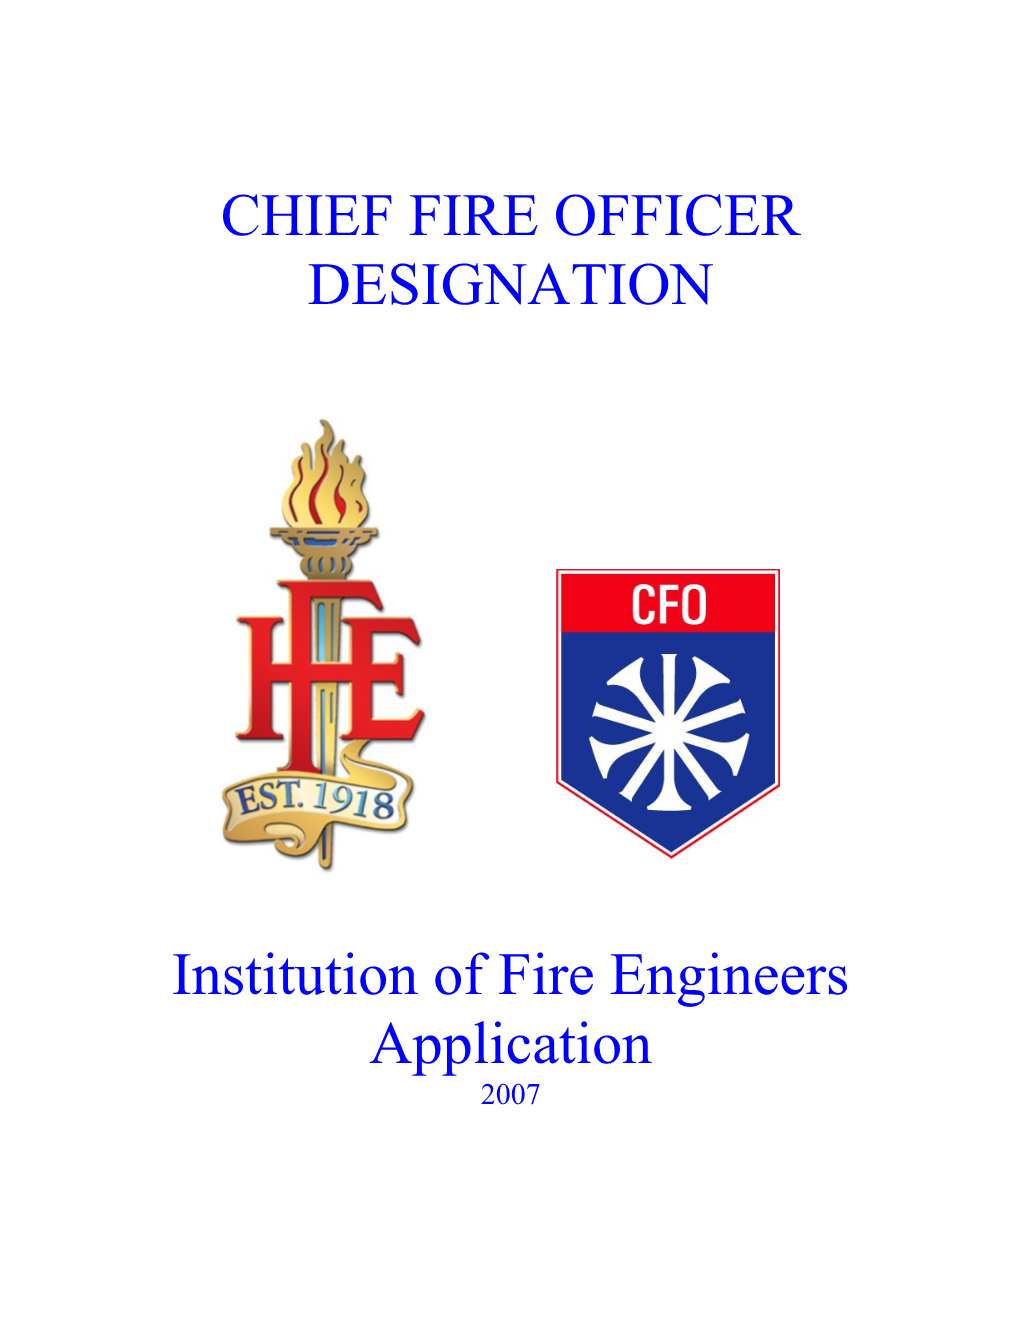 The Institution of Fire Engineers (IFE) Application for the Designation of Chief Fire Officer